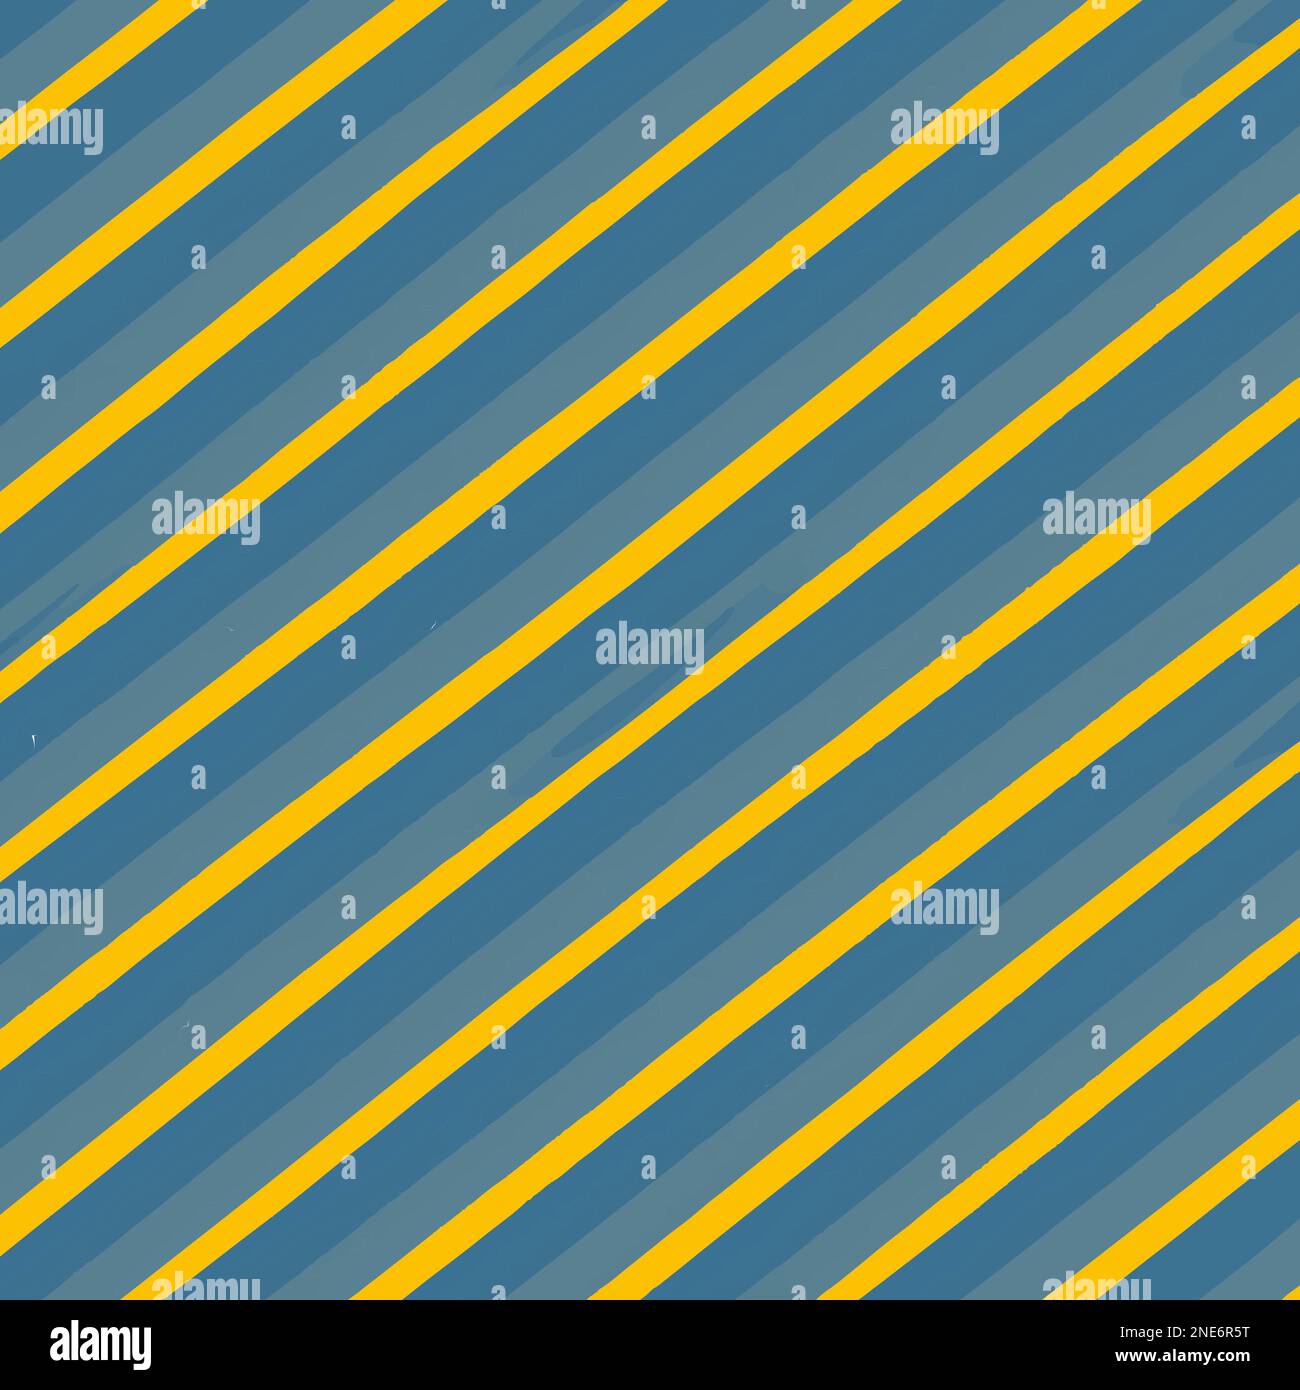 Blue Yellow Pattern With Diagonal Lines And Small Breakouts Vector Background Style. Handmade vector art. Stock Vector